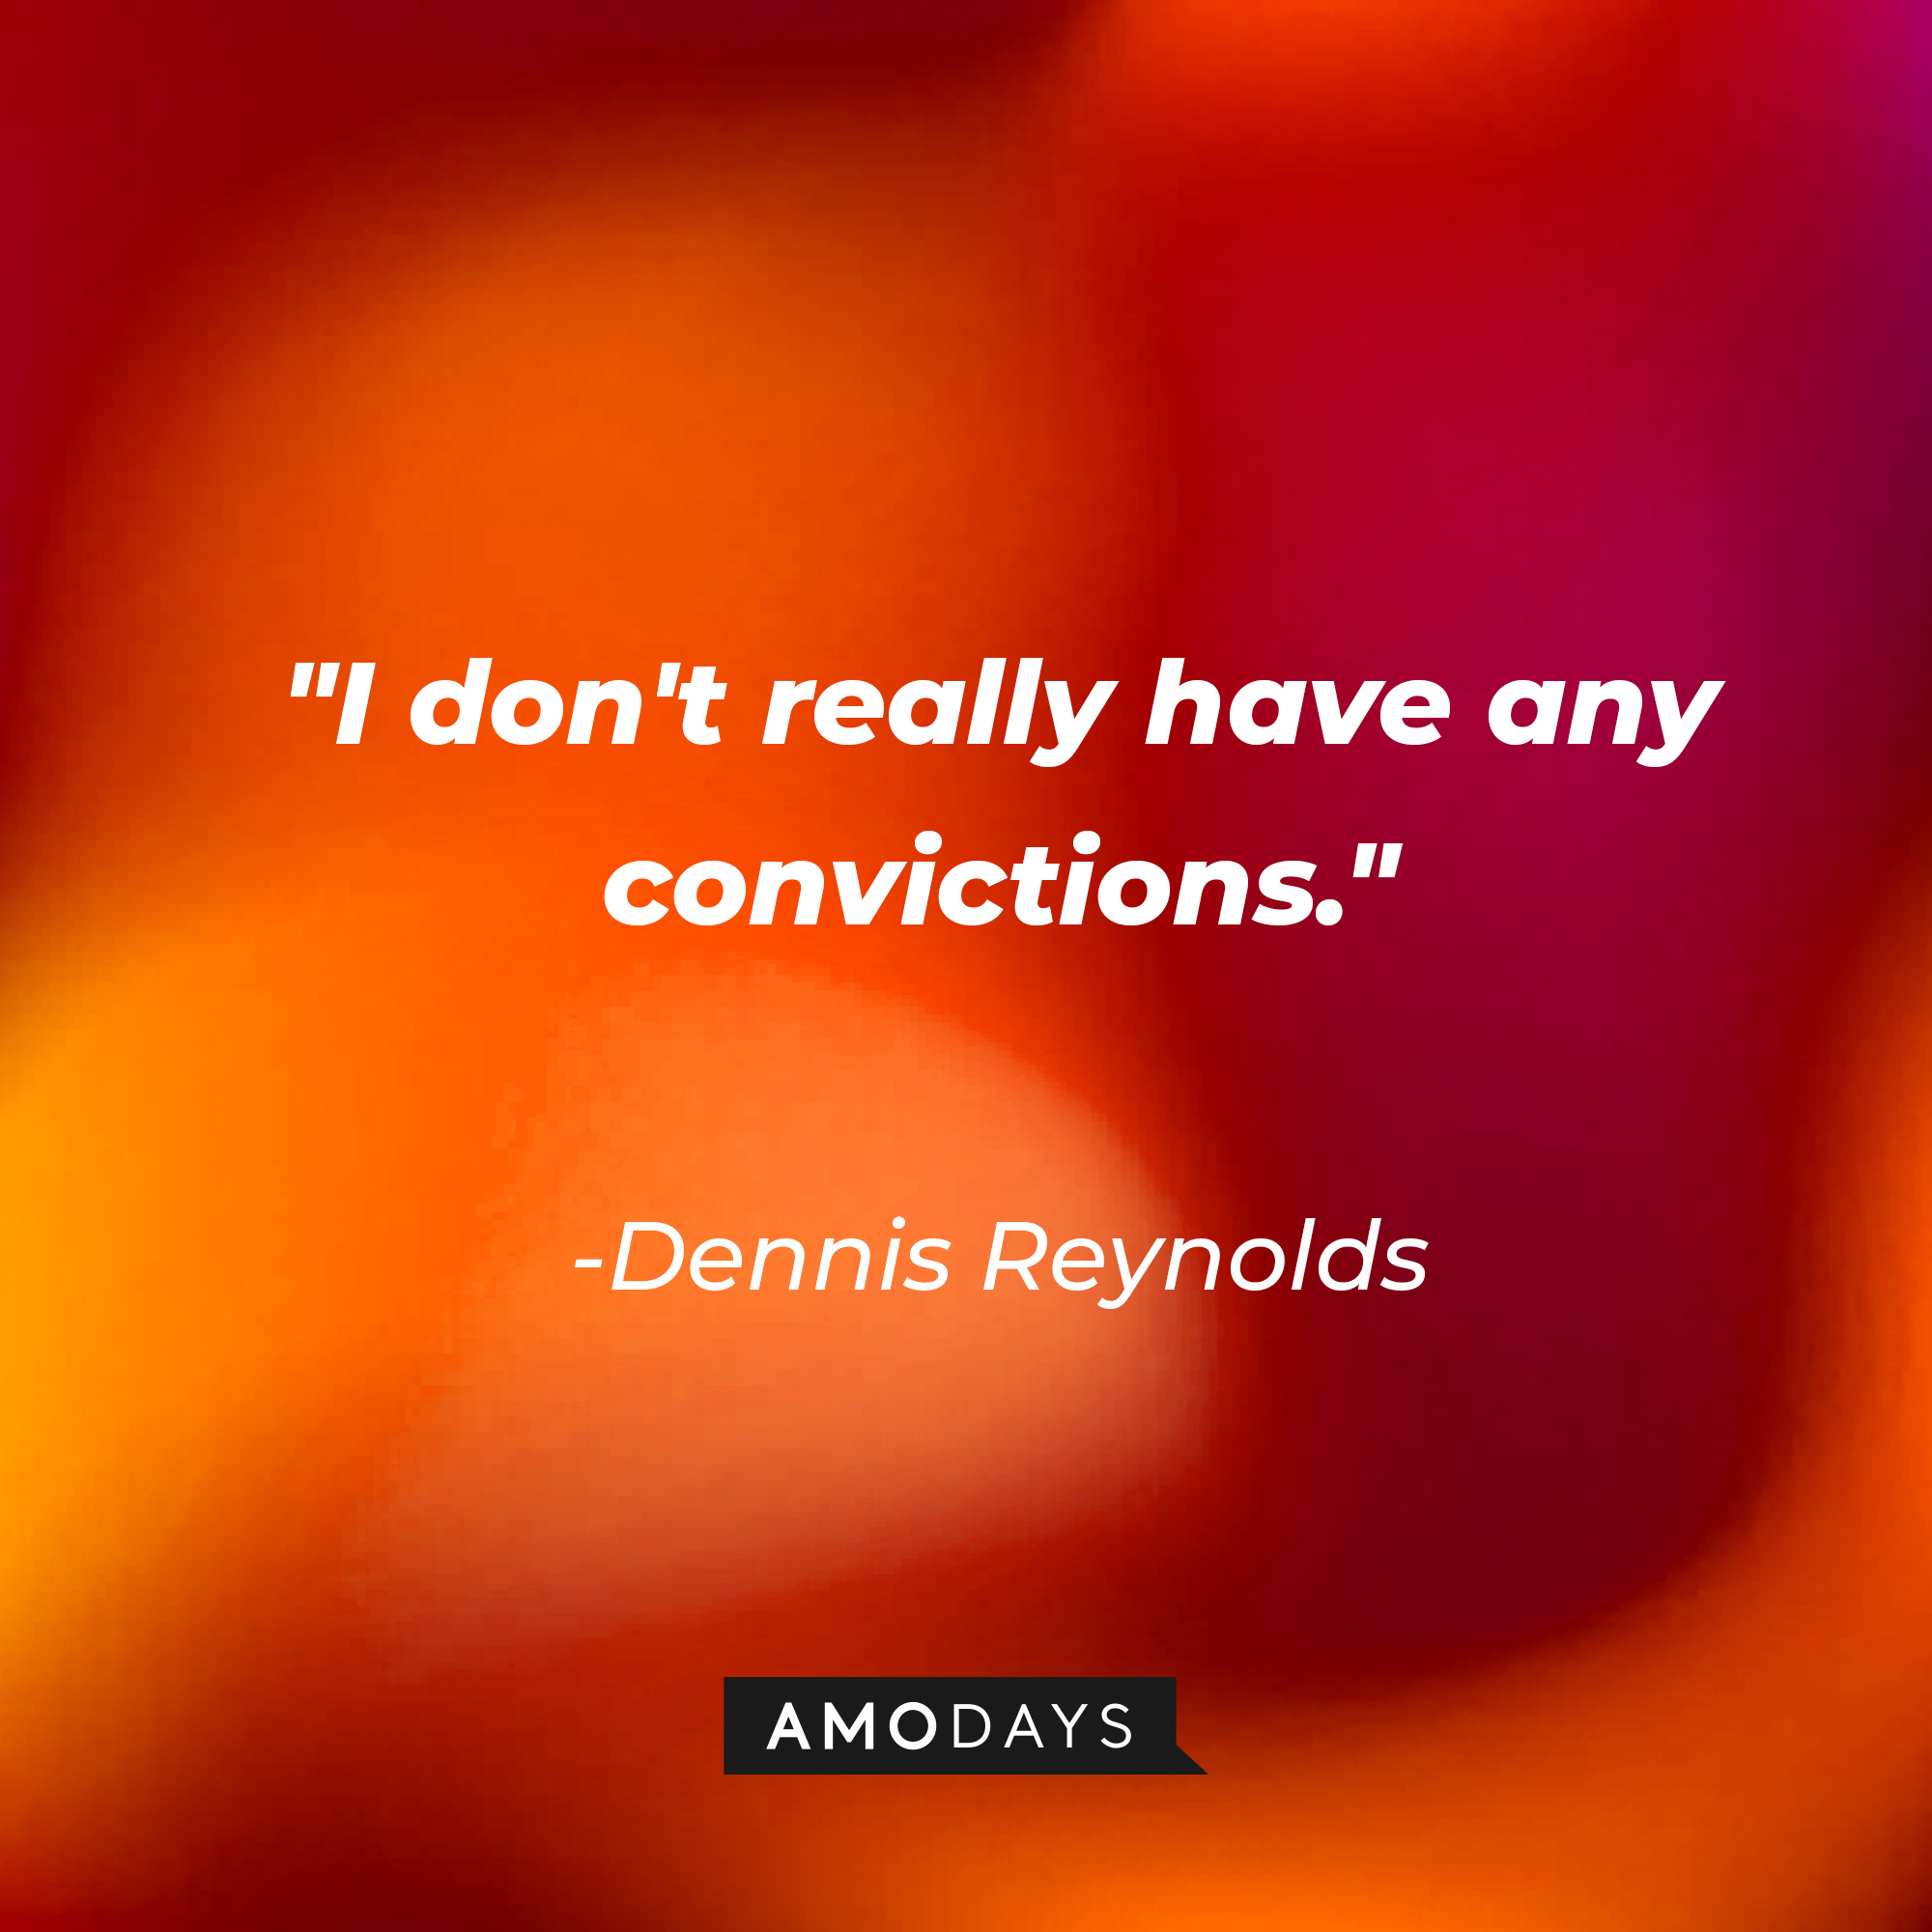 Dennis Reynolds’ quote:  “I don't really have any convictions.” | Source: AmoDays